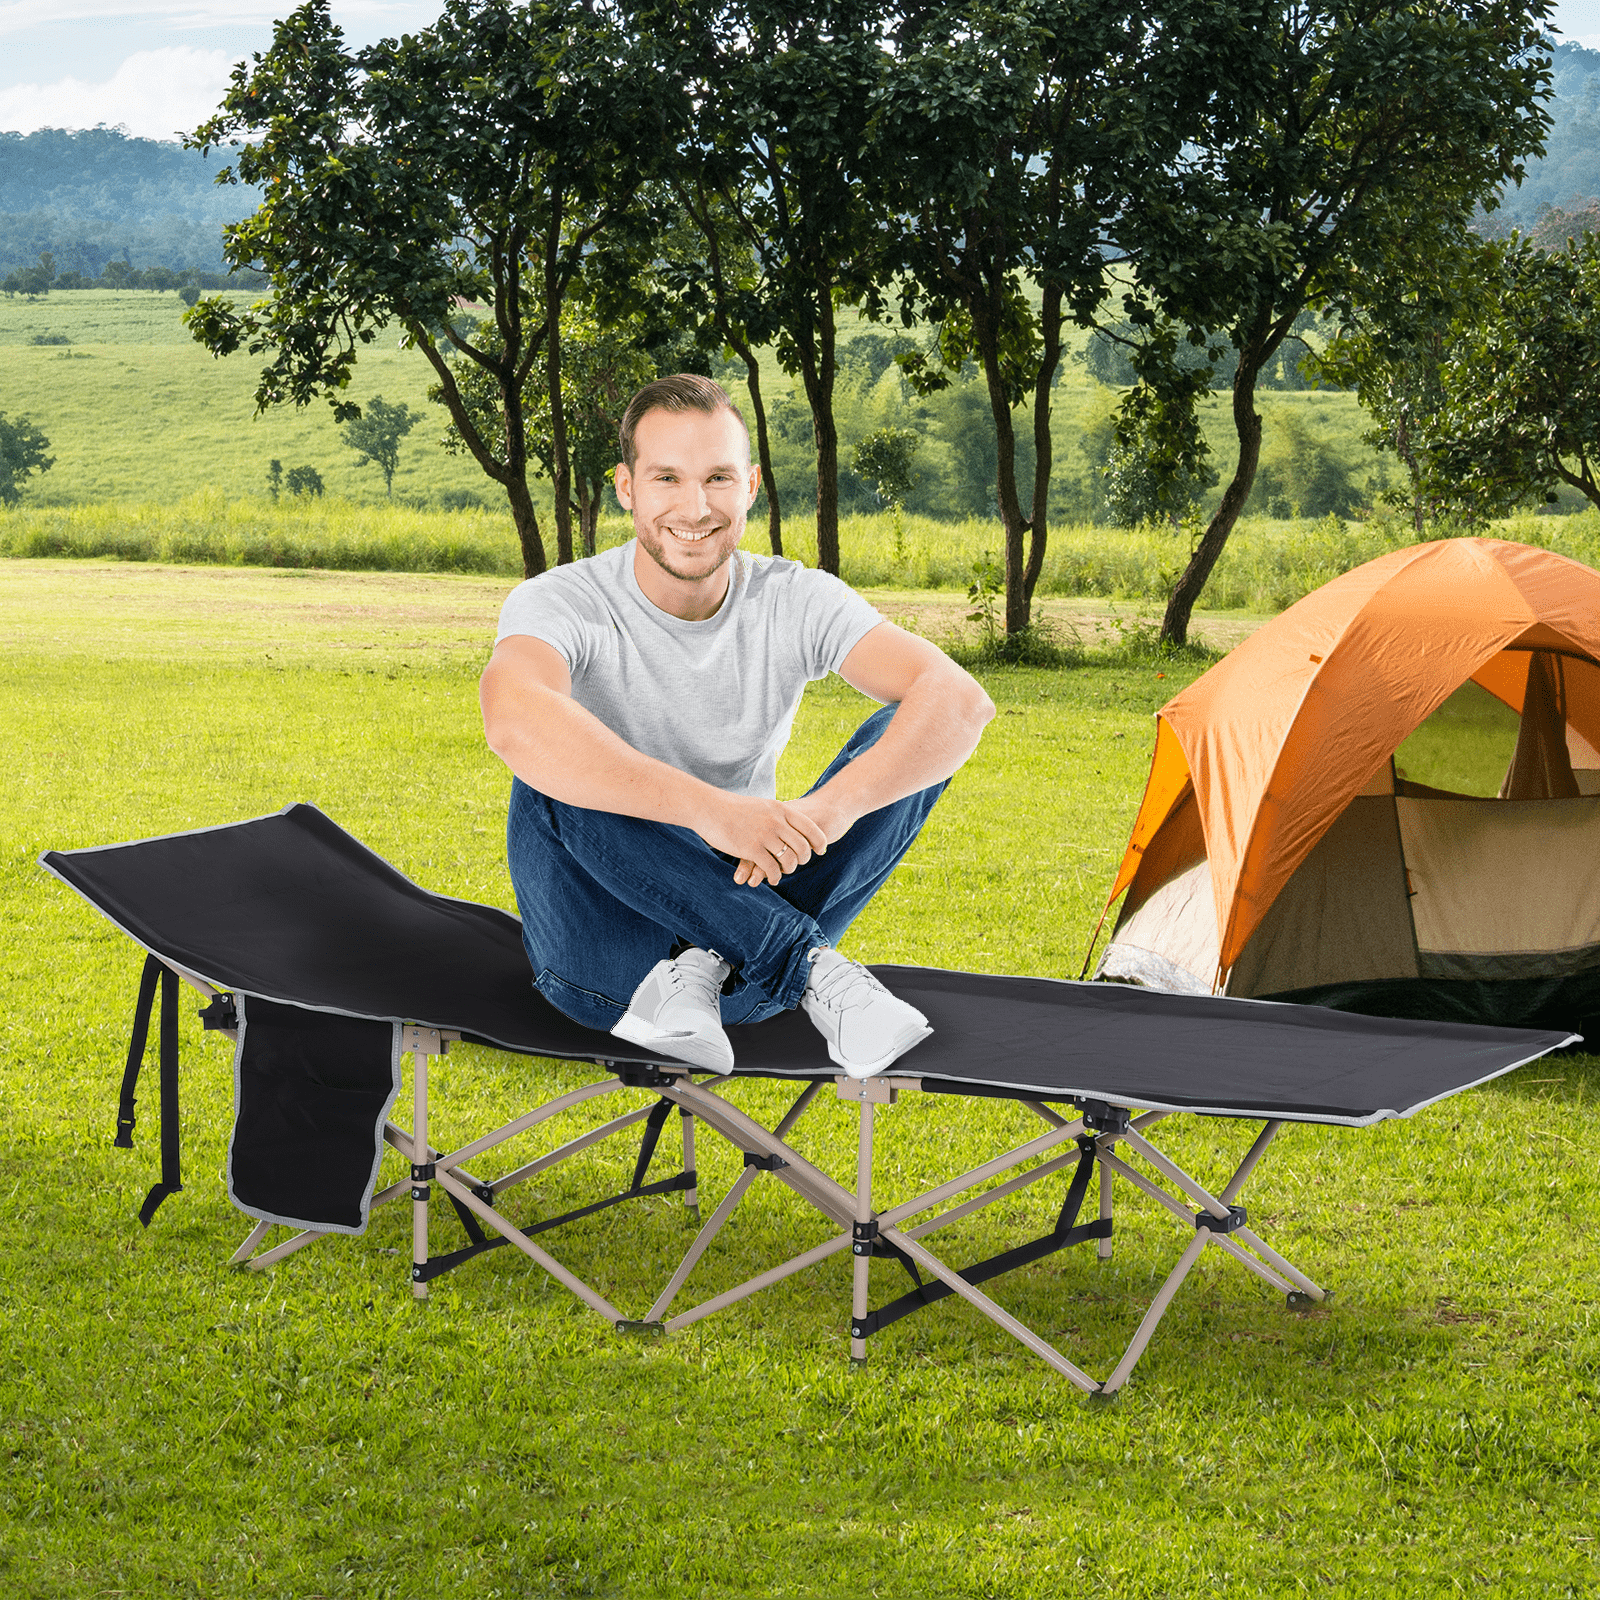 Outsunny Single Person Camping Bed Folding Cot - Portable Military Sleeping Bed with Side Pocket and Carry Bag Sleeping Mats and Airbeds Cosy Camping Co.   